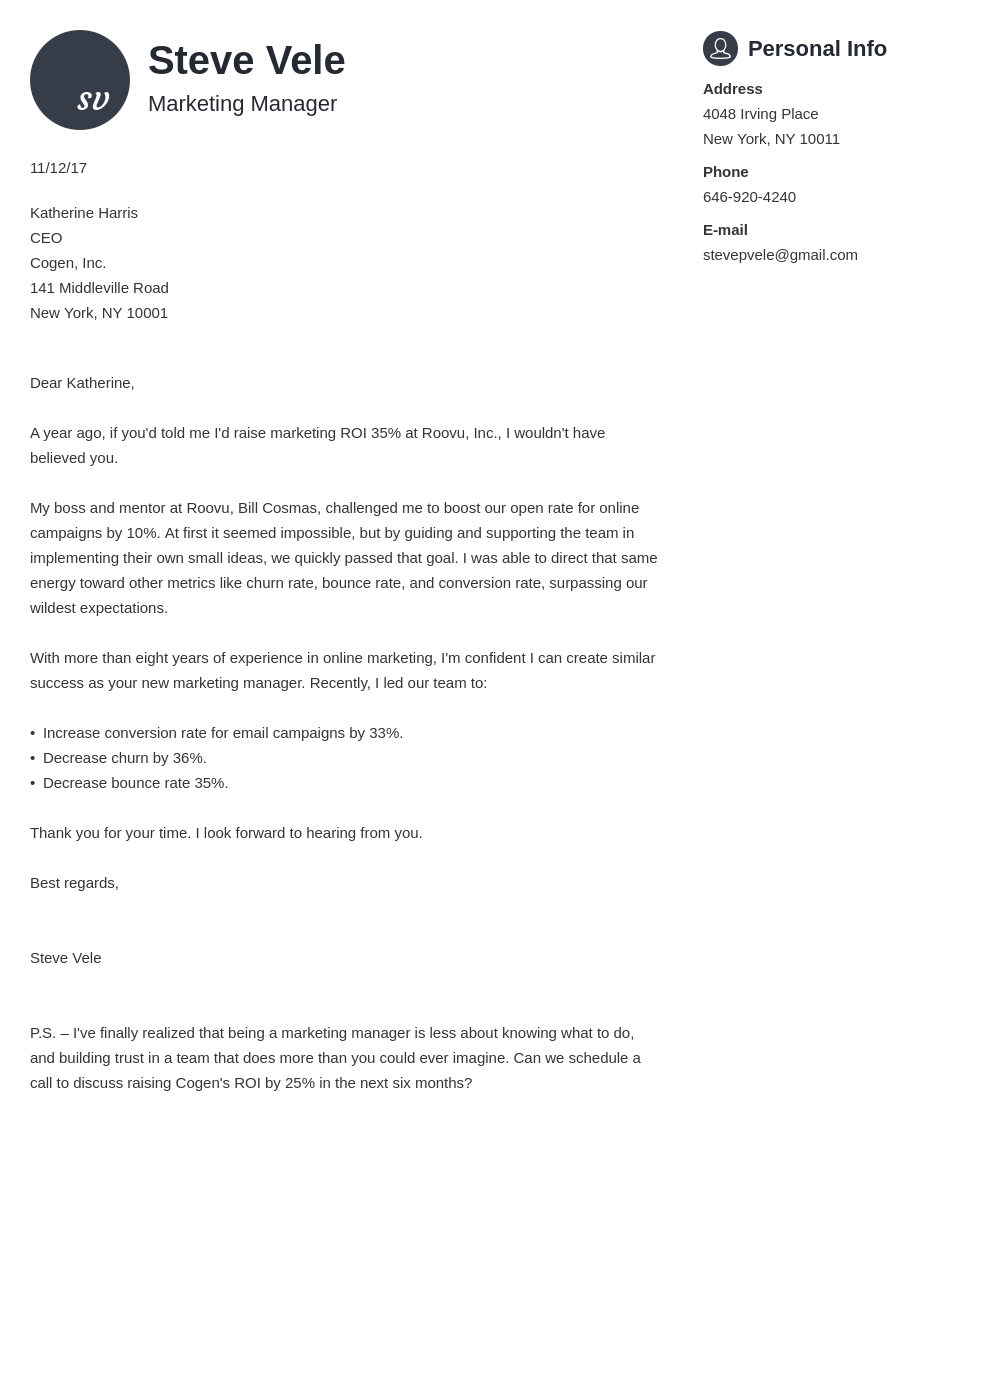 How to End a Cover Letter [8+ Closing Paragraph Examples]